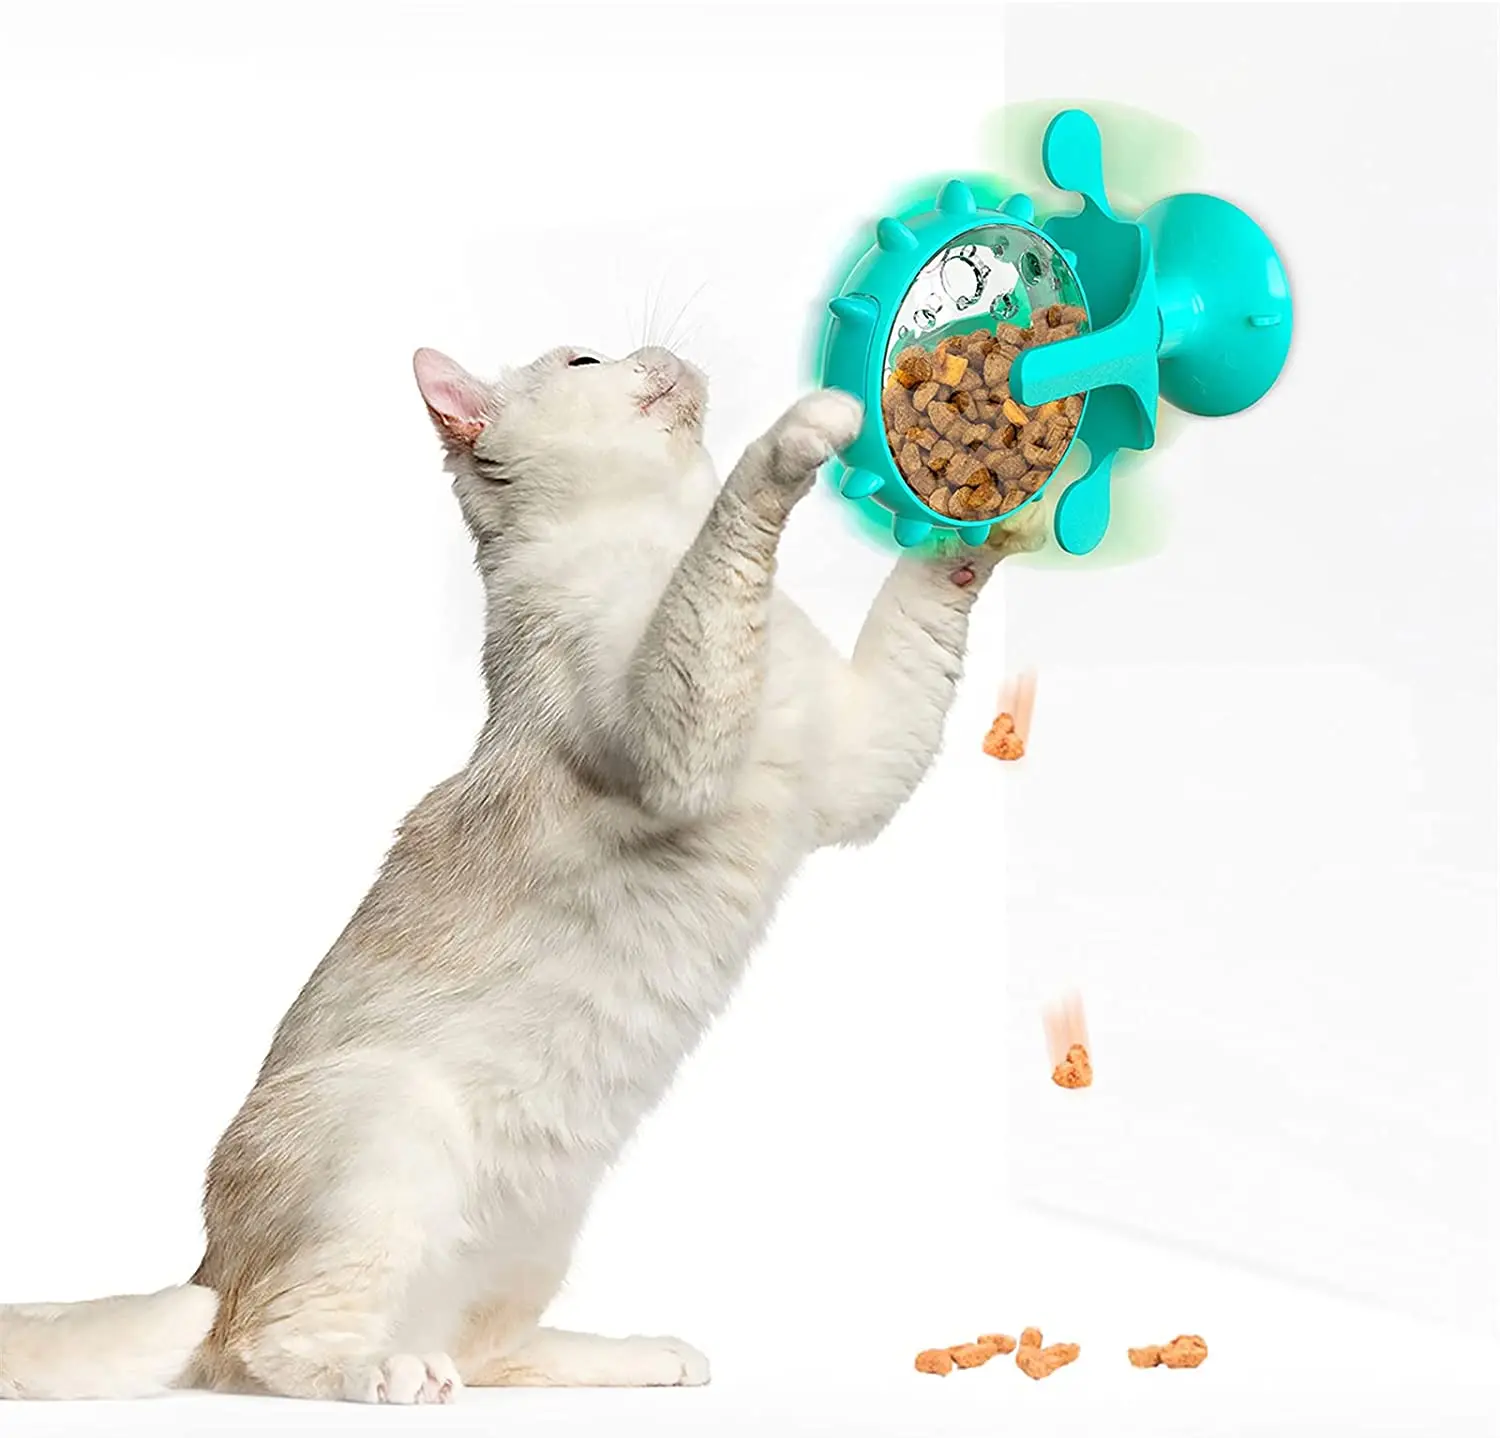 https://ae01.alicdn.com/kf/S26431b948f824a2daf5db94514c45bcel/Turntable-Leaking-Food-Cat-Toy-Training-Ball-Exercise-IQ-Cat-Feeder-Kitten-toy-pet-Toy-Cat.jpg